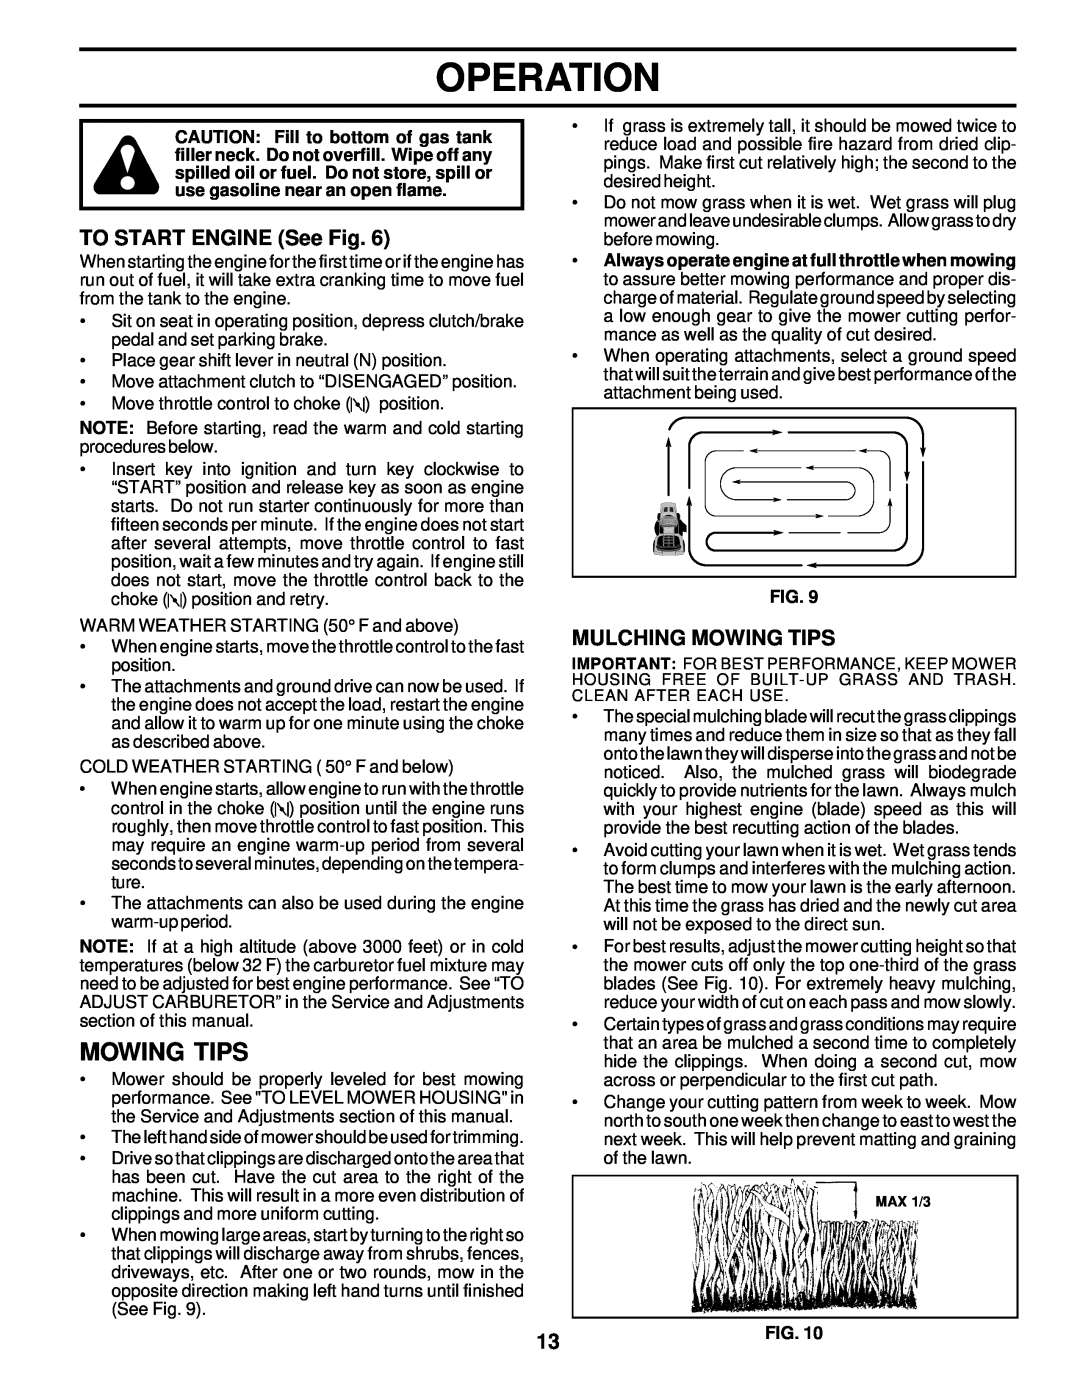 Poulan PRK17G42STA owner manual TO START ENGINE See Fig, Mulching Mowing Tips, Operation 